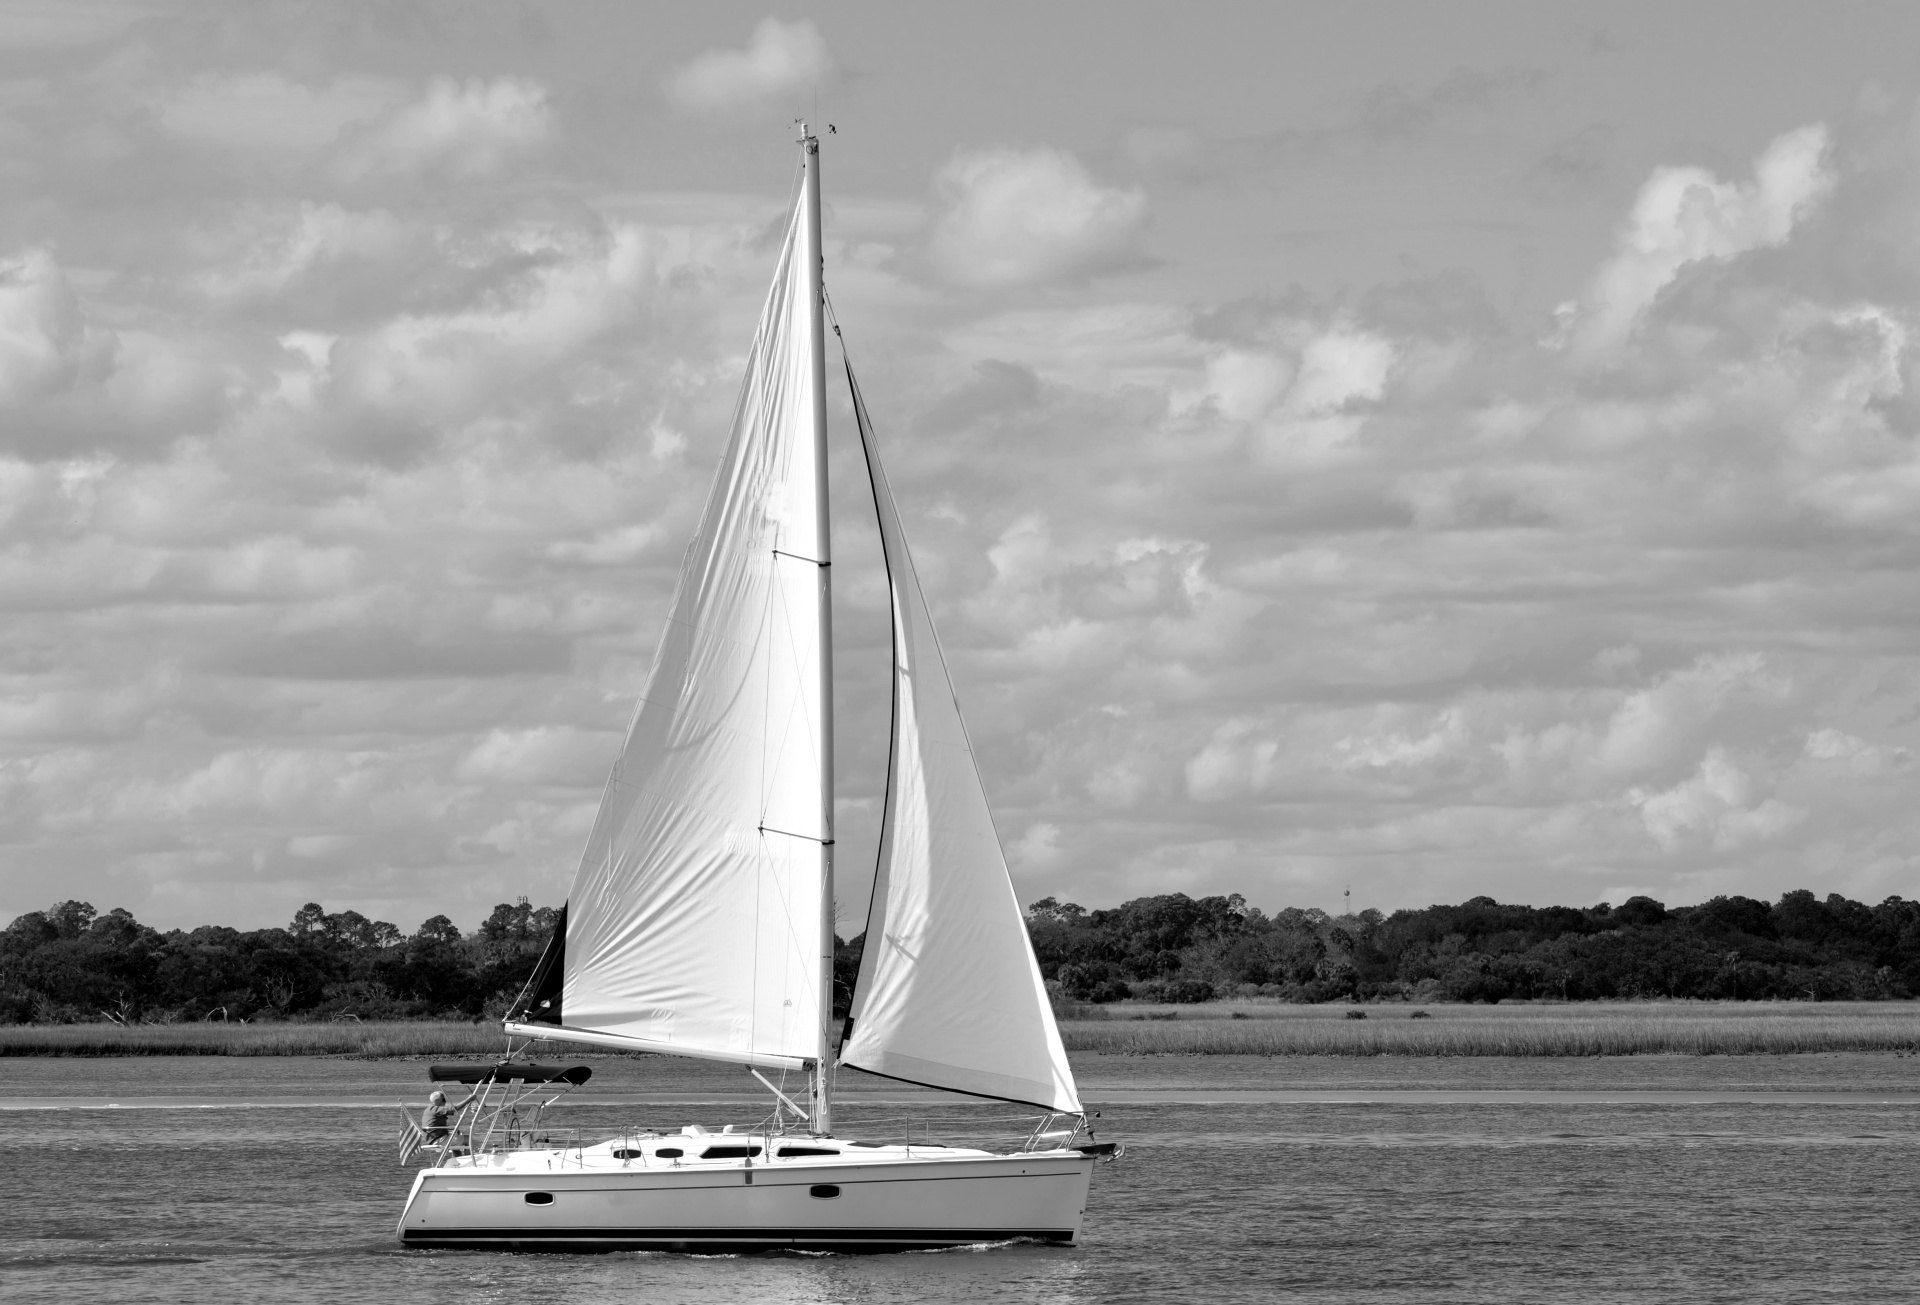 Sail boat,sailing,outdoors,landscape,river - free image from needpix.com